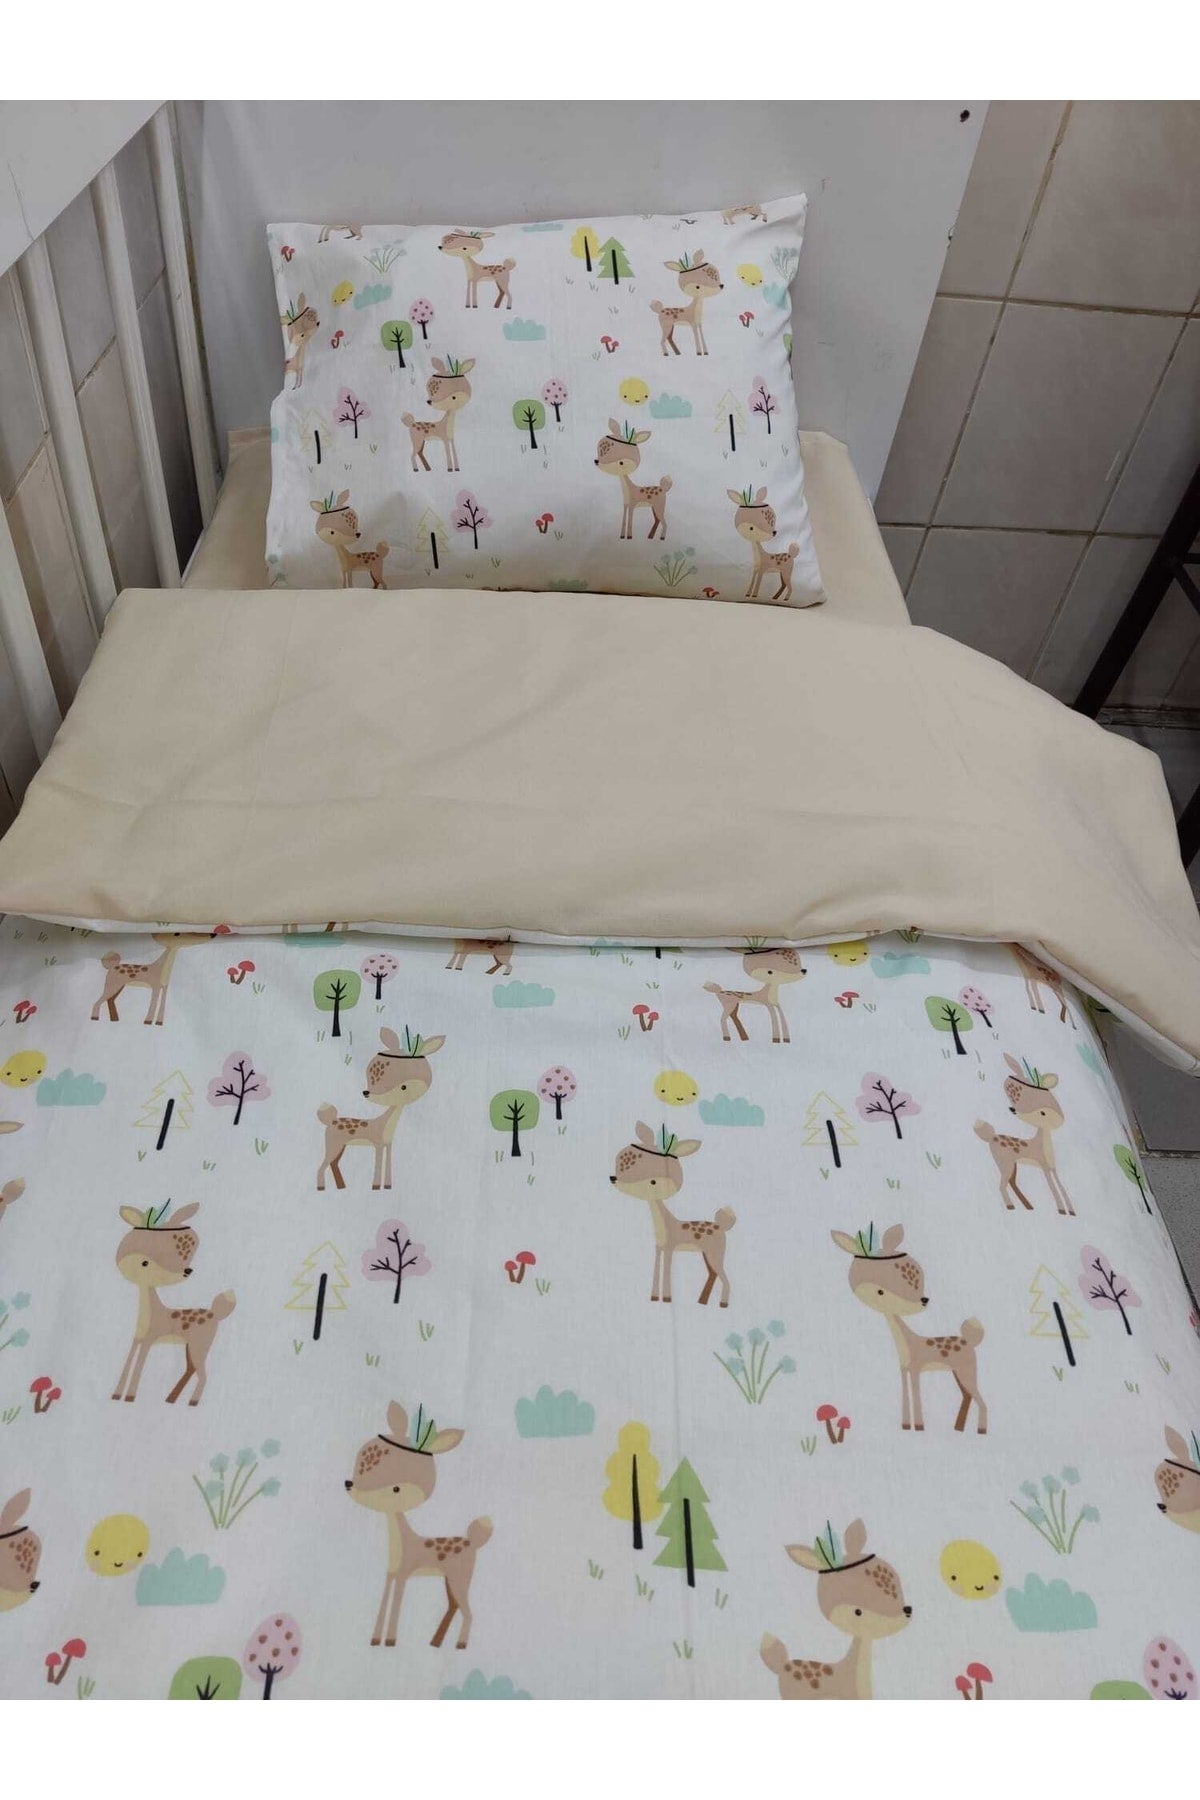 Cotton Baby Kids Duvet Cover Set 60x120 For Crib Roe Brown